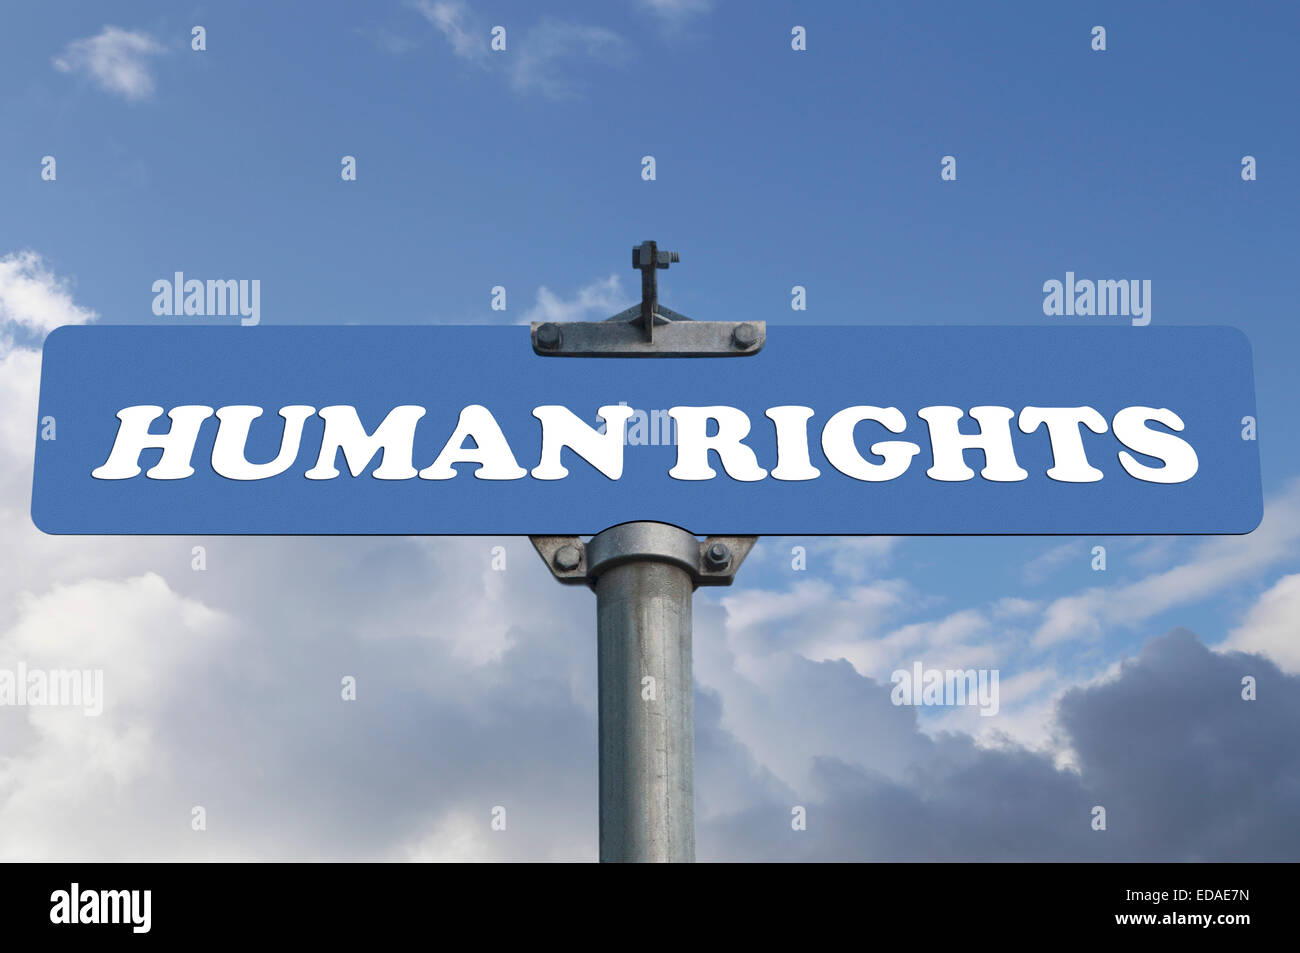 Human rights road sign Stock Photo